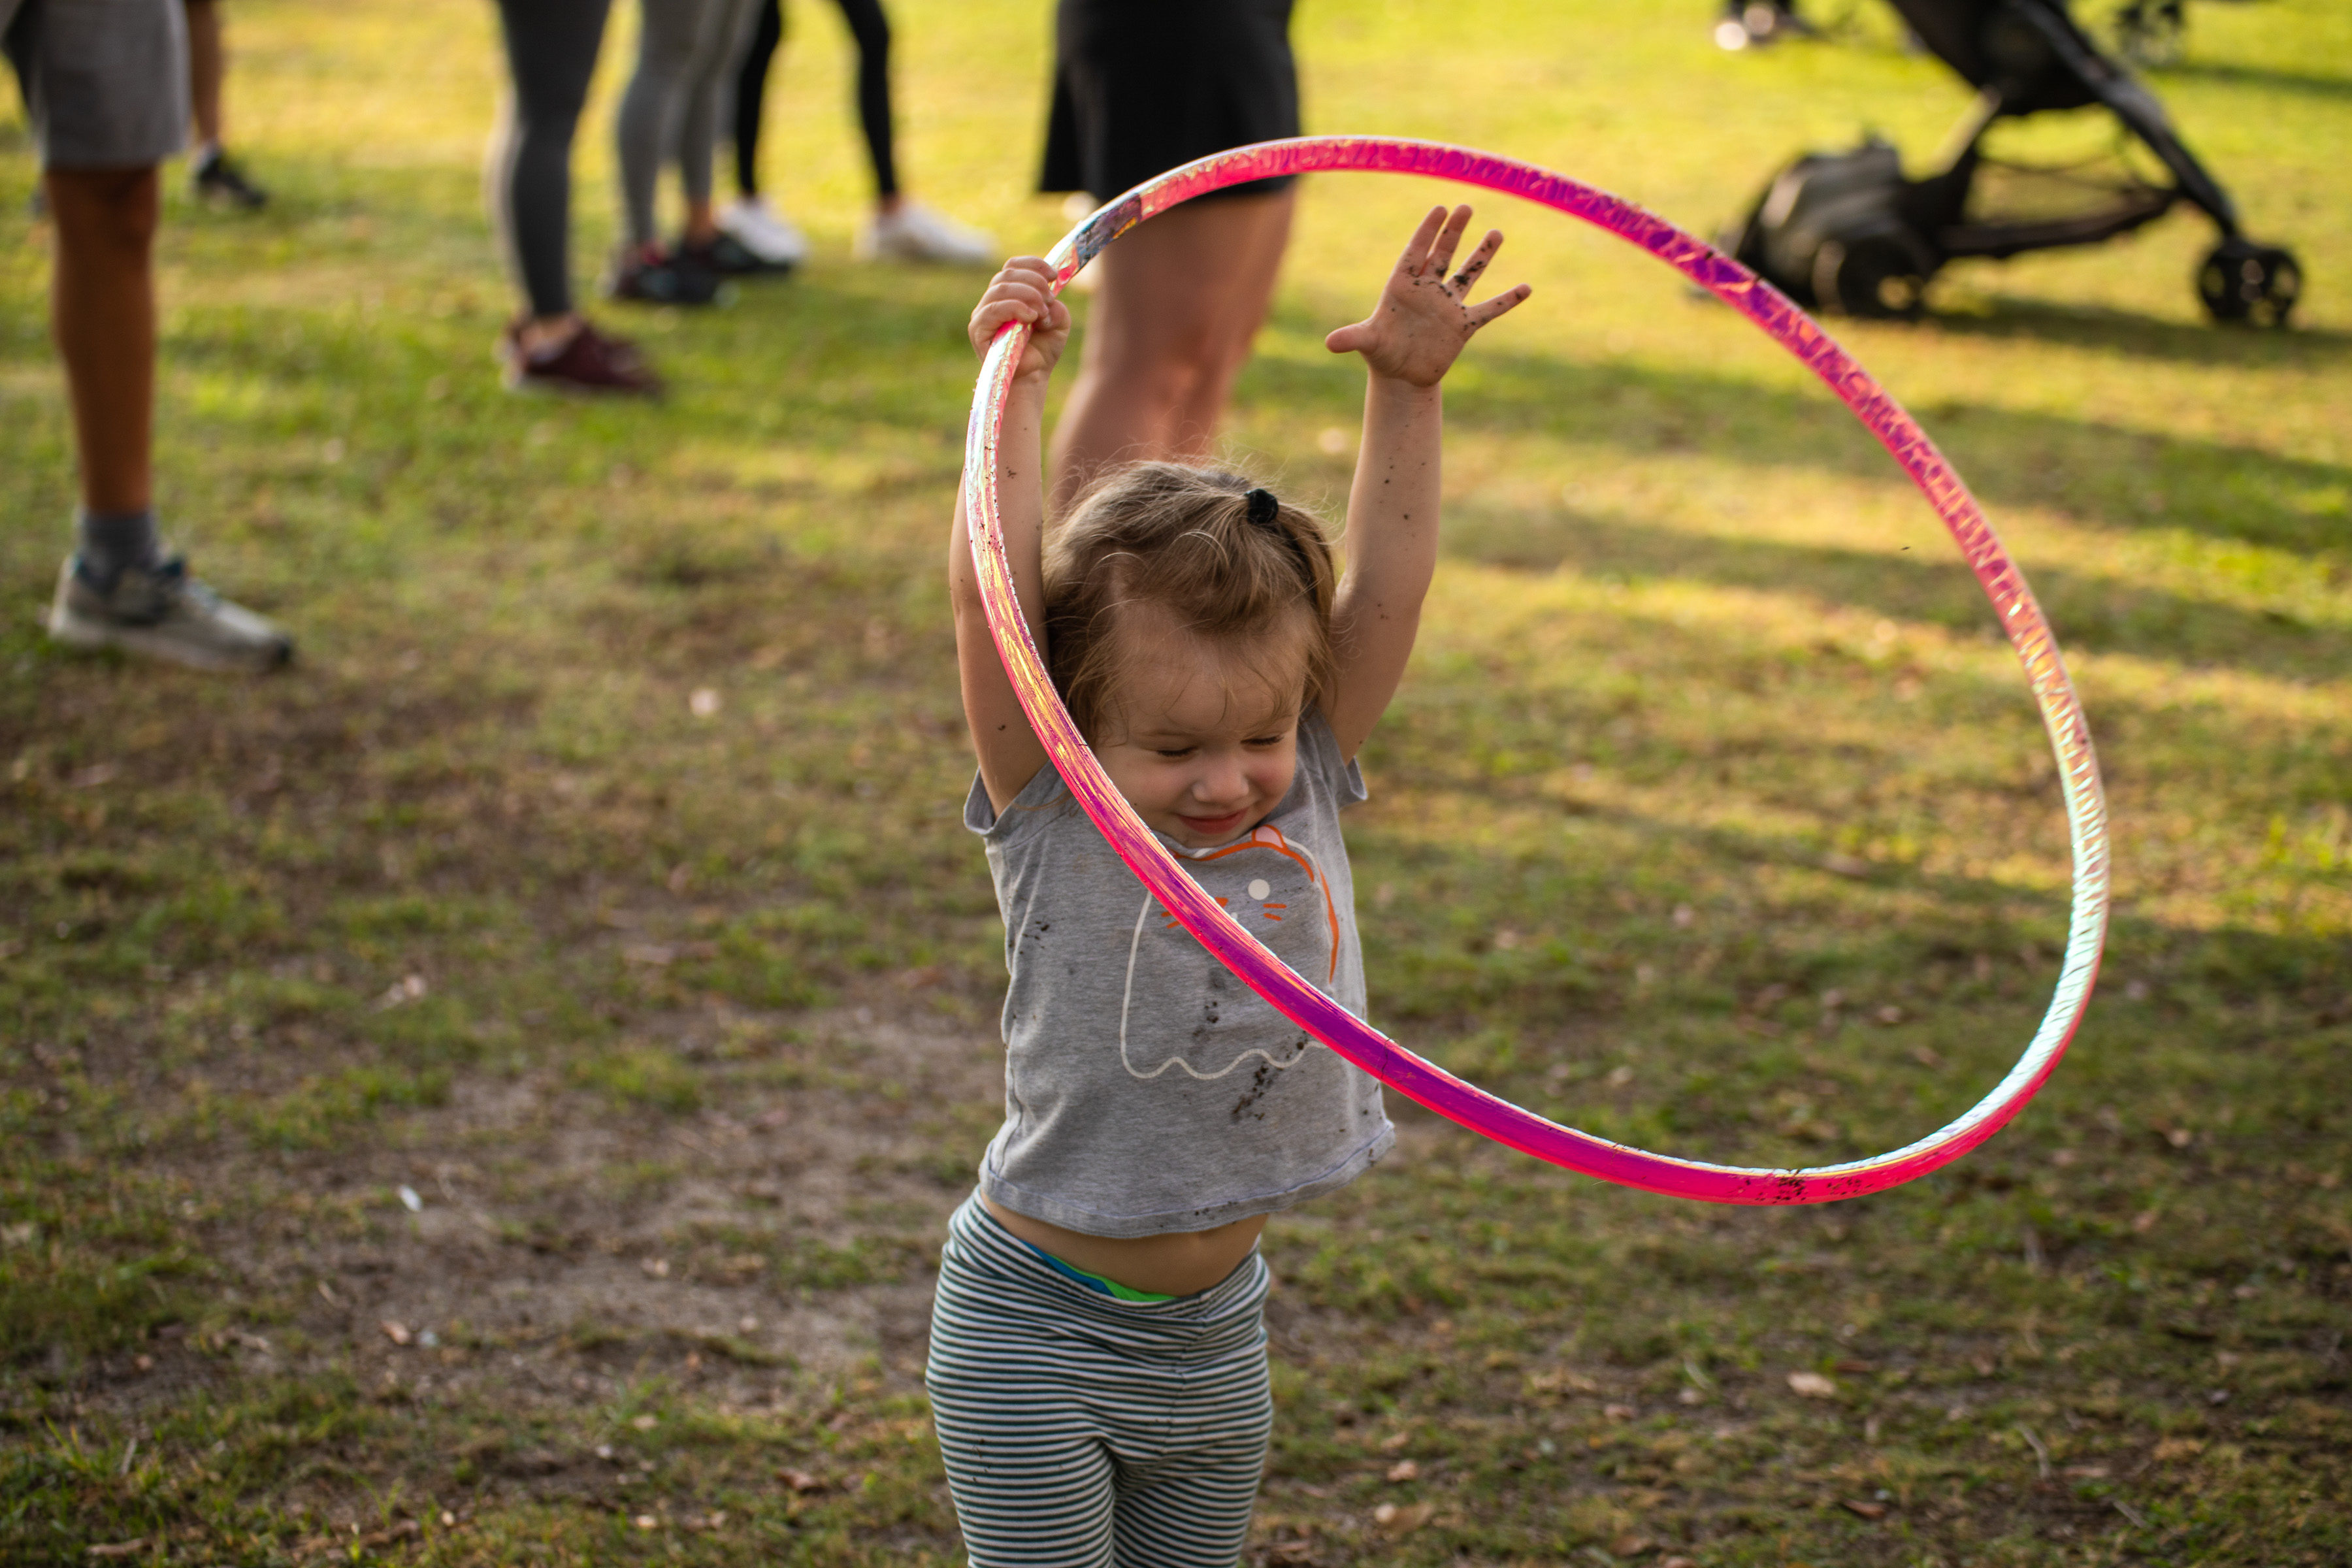 Come play with hula hoops!